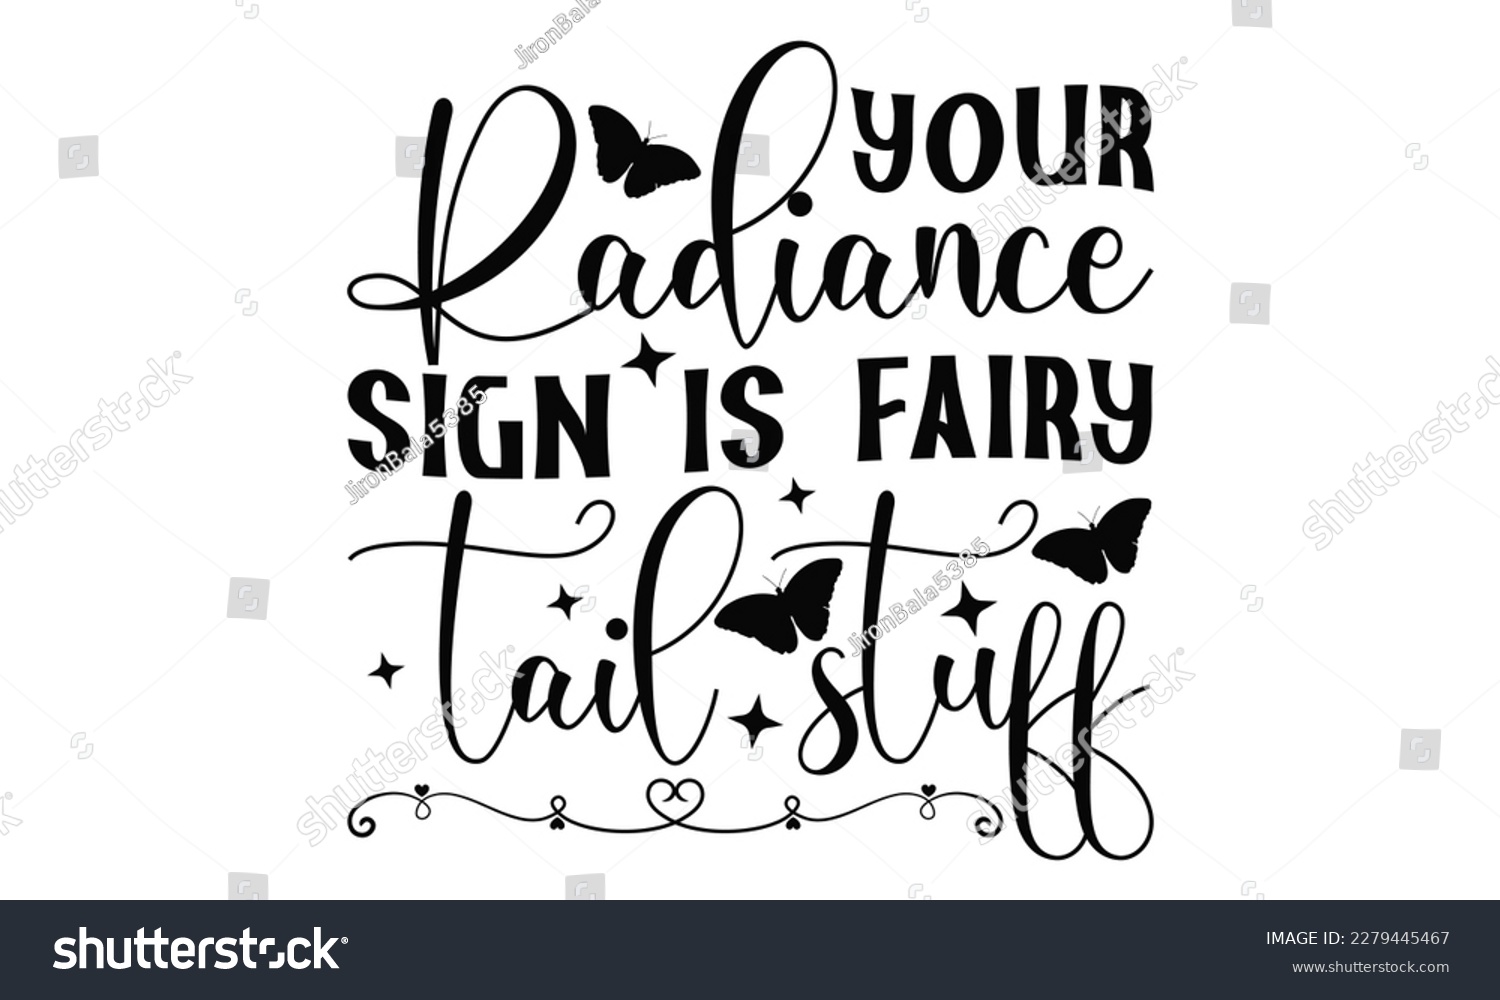 SVG of Your Radiance Sign Is Fairy Tail Stuff - Butterfly SVG Design, typography design, this illustration can be used as a print on t-shirts and bags, stationary or as a poster.
 svg